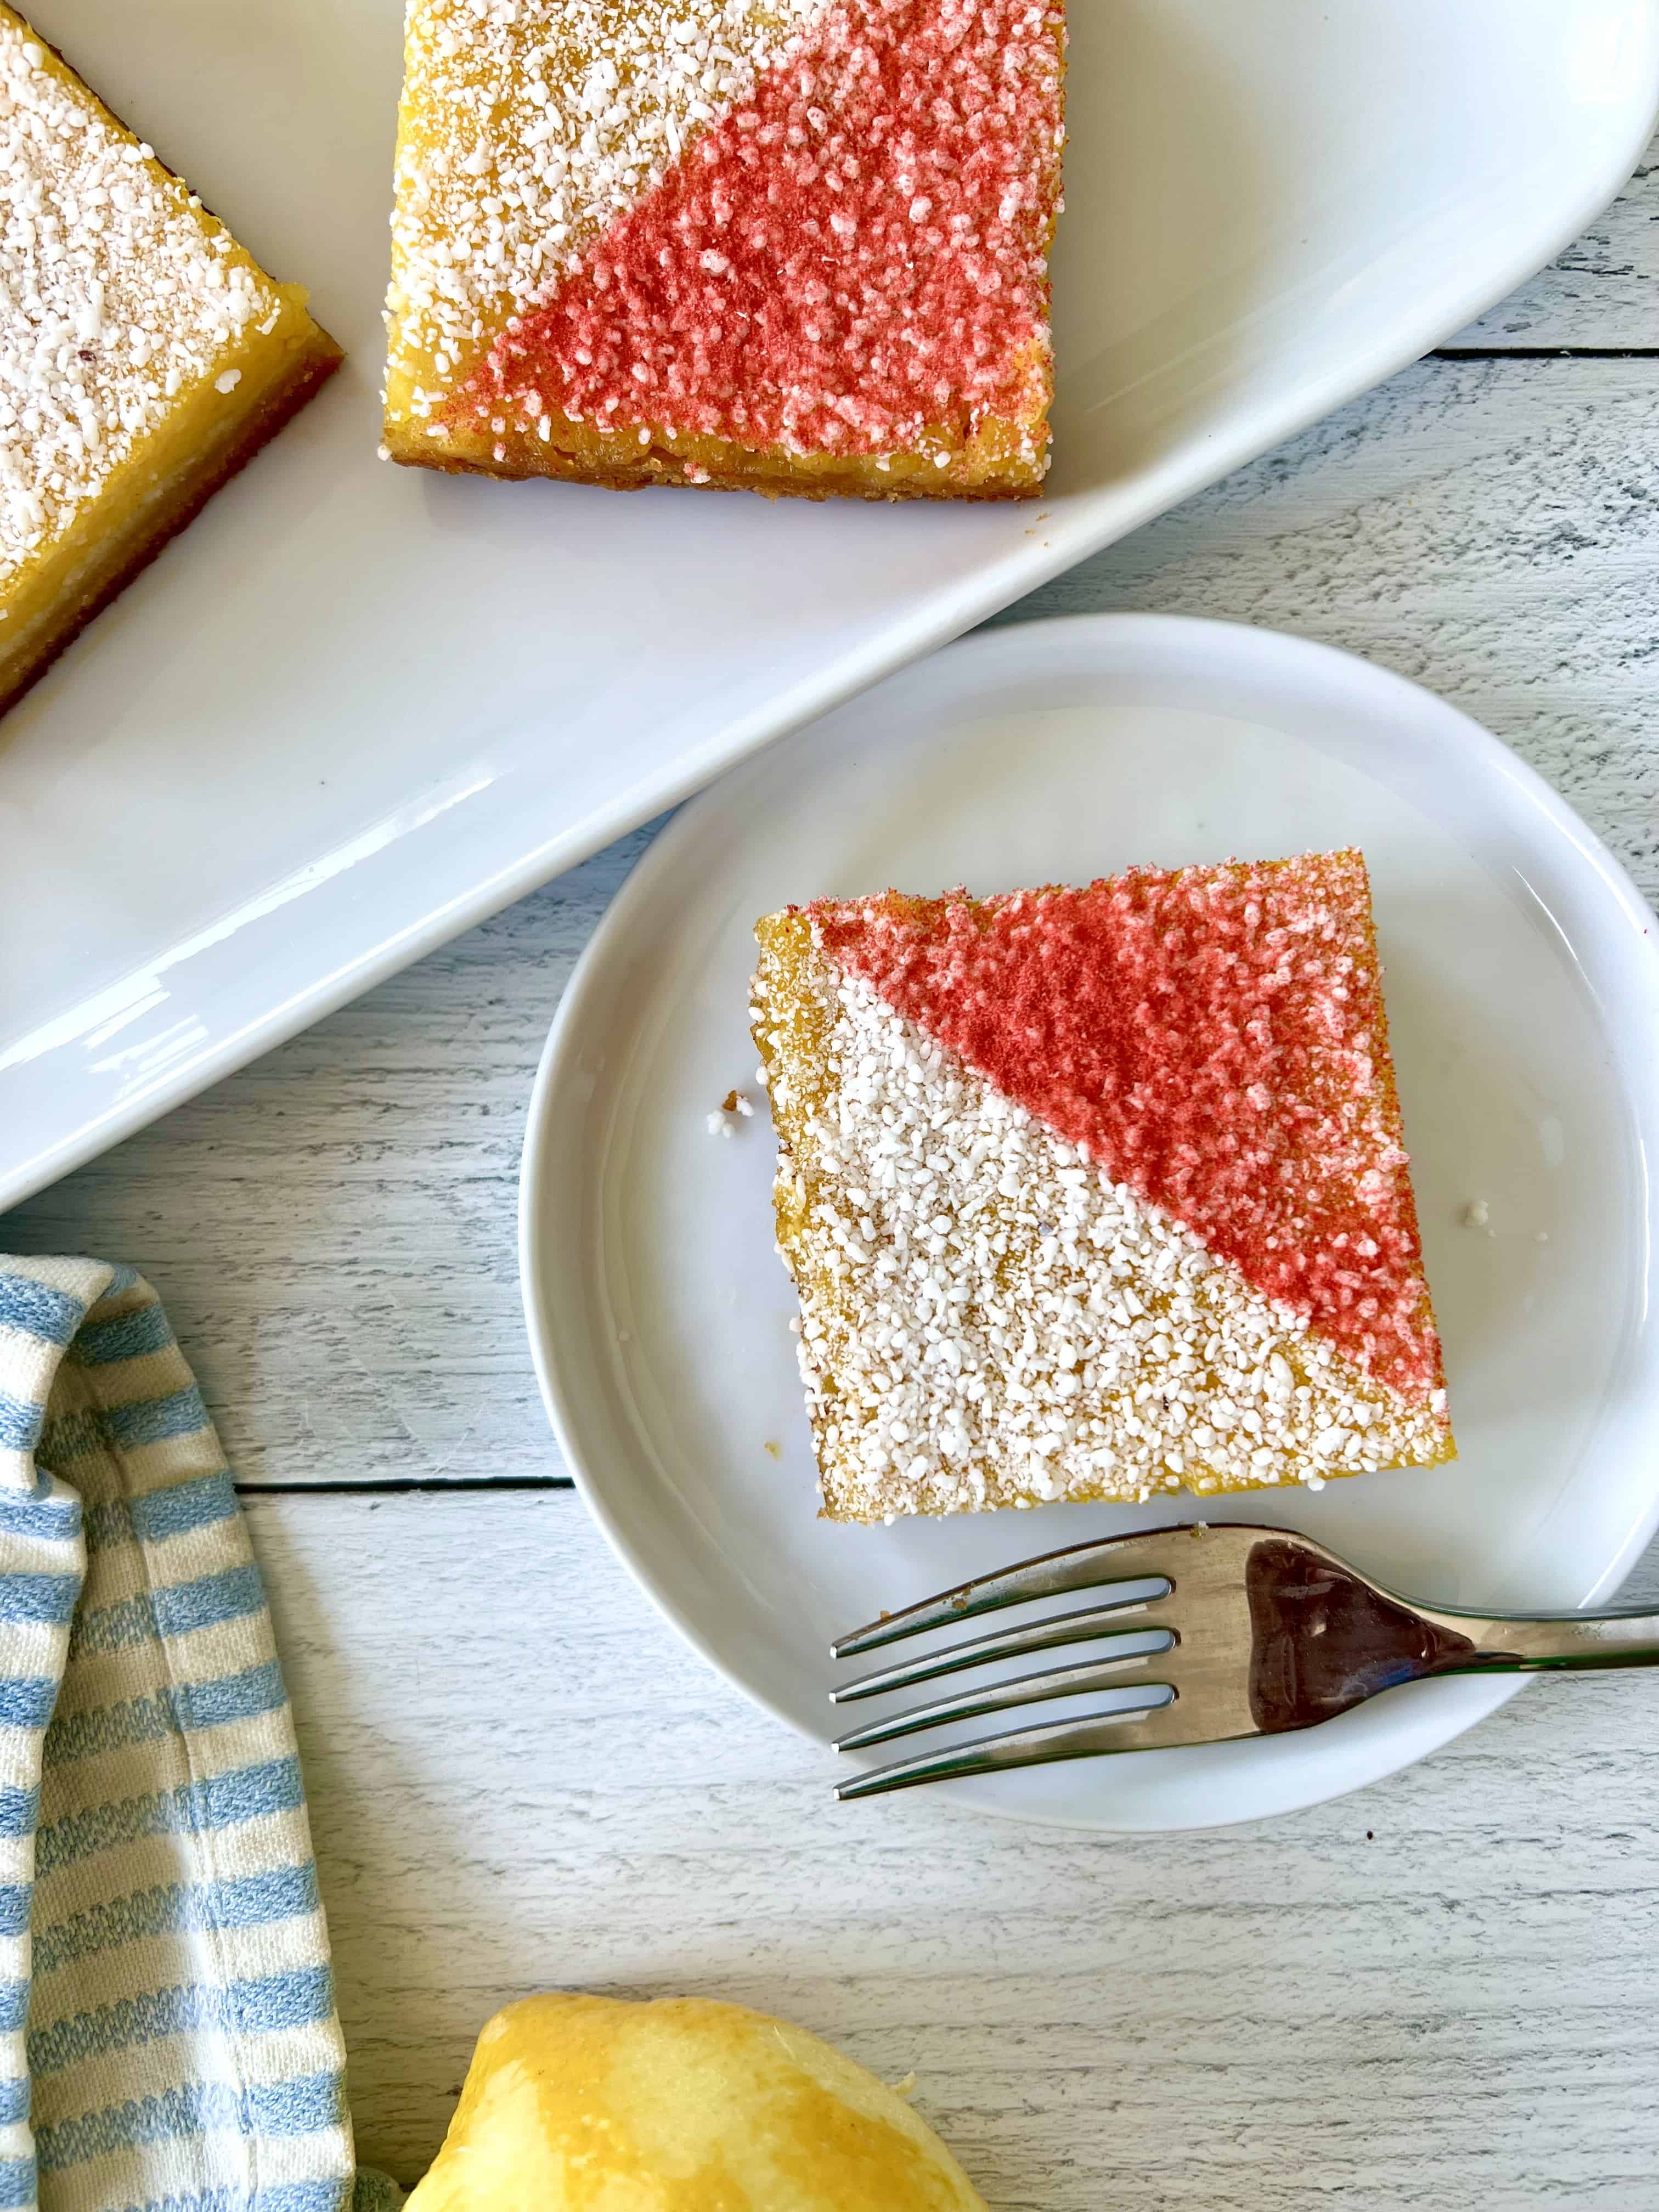 Grain-free lemon bars dusted with crushed freeze-dried strawberries.